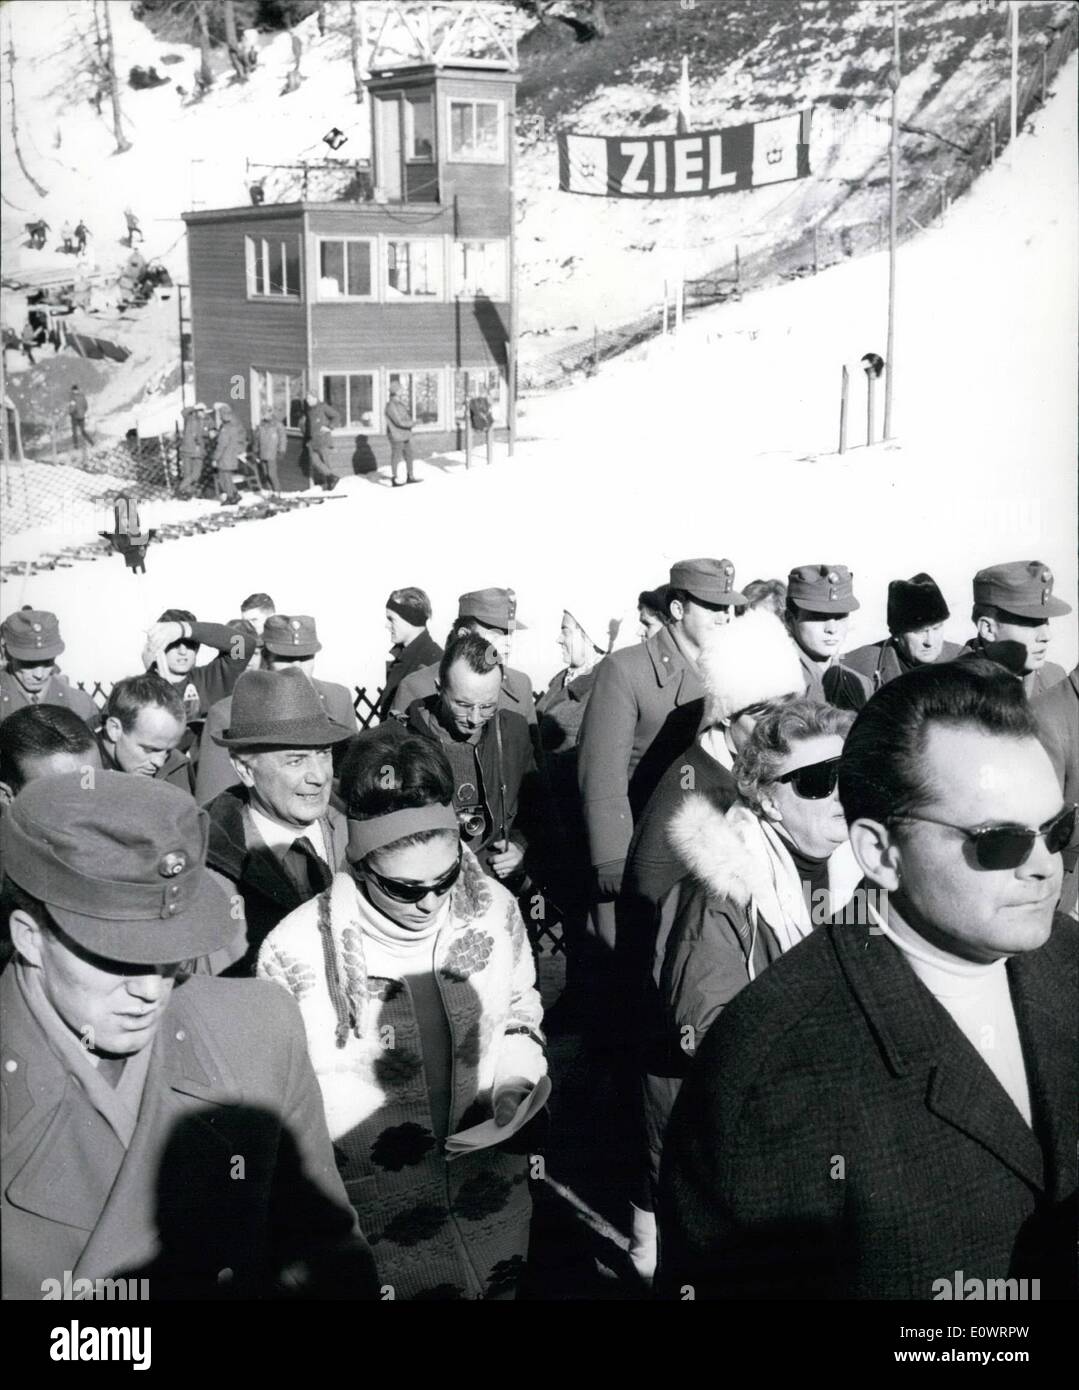 Feb. 02, 1964 - 9th Winter Olympics in Innsbruck. Empress Farah Diba and Queen Juliane of the Netherlands(partially hidden on the right side) at the ski stadium. American Troop Parade at Berlin Airport. Stock Photo